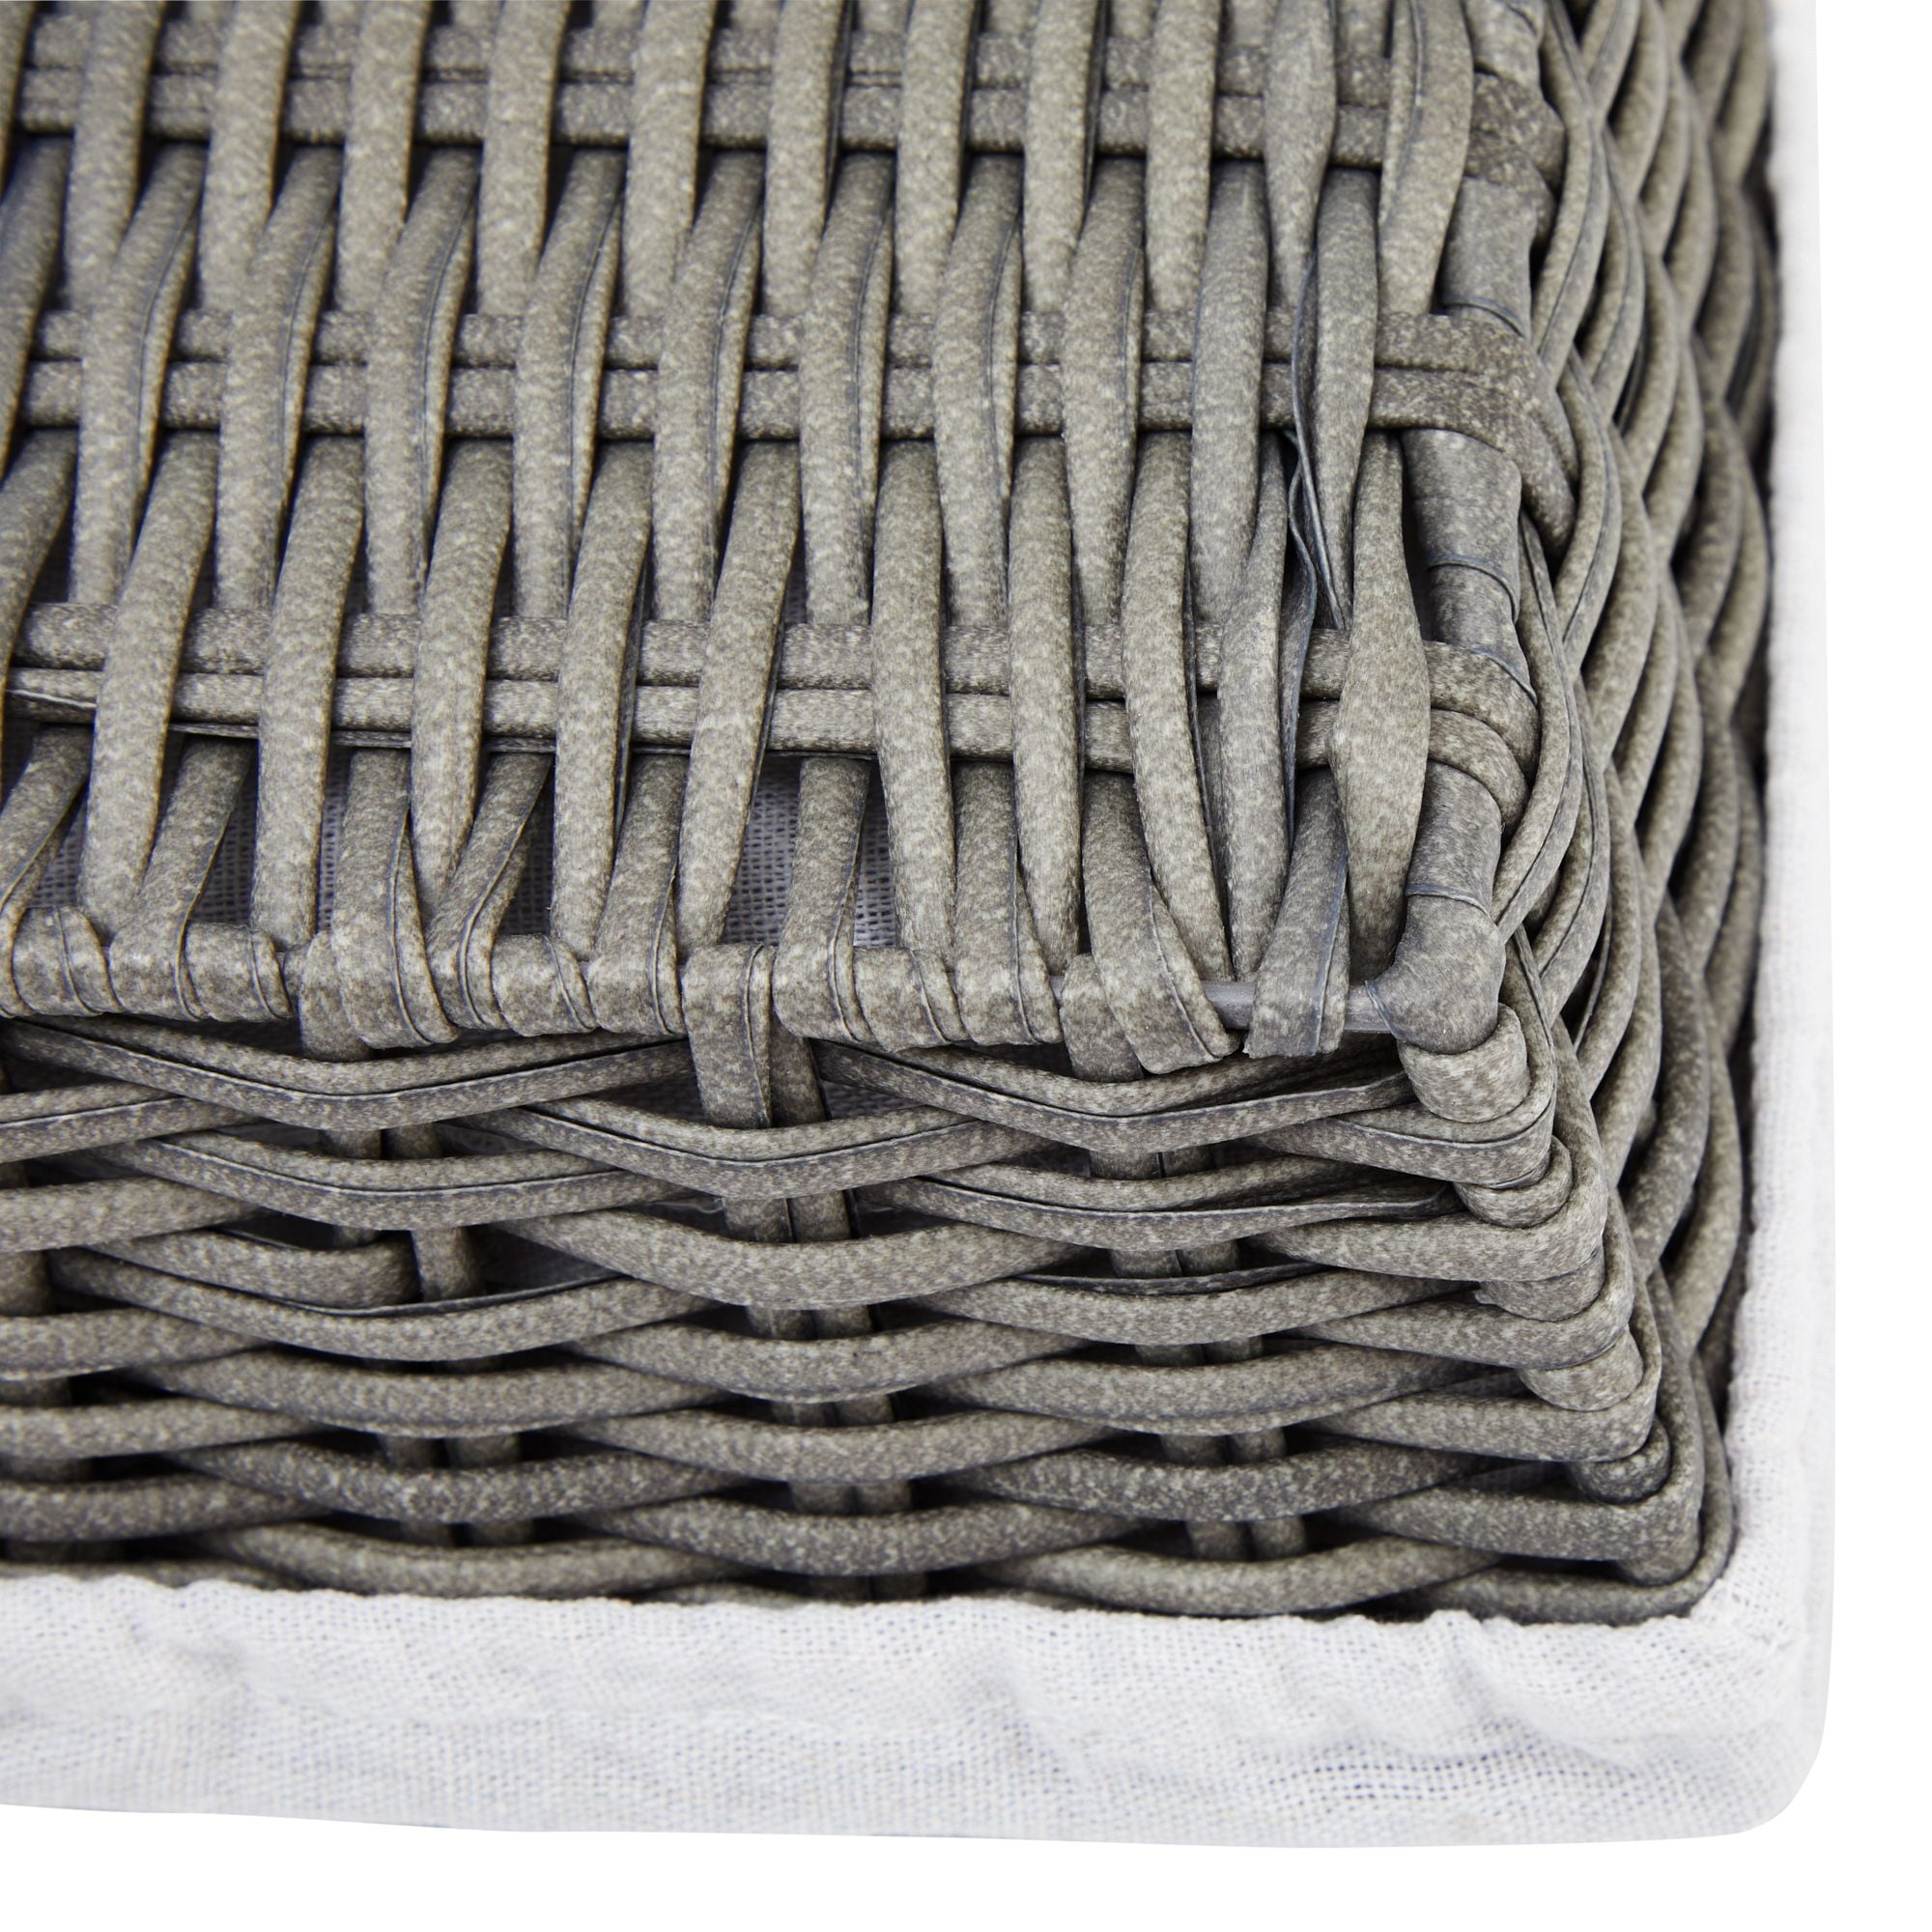 Farmlyn Creek 3-pack 9 Inch Square Wicker Storage Baskets With Liners -  Small Woven Bins For Organizing Kitchen And Closet Shelves : Target